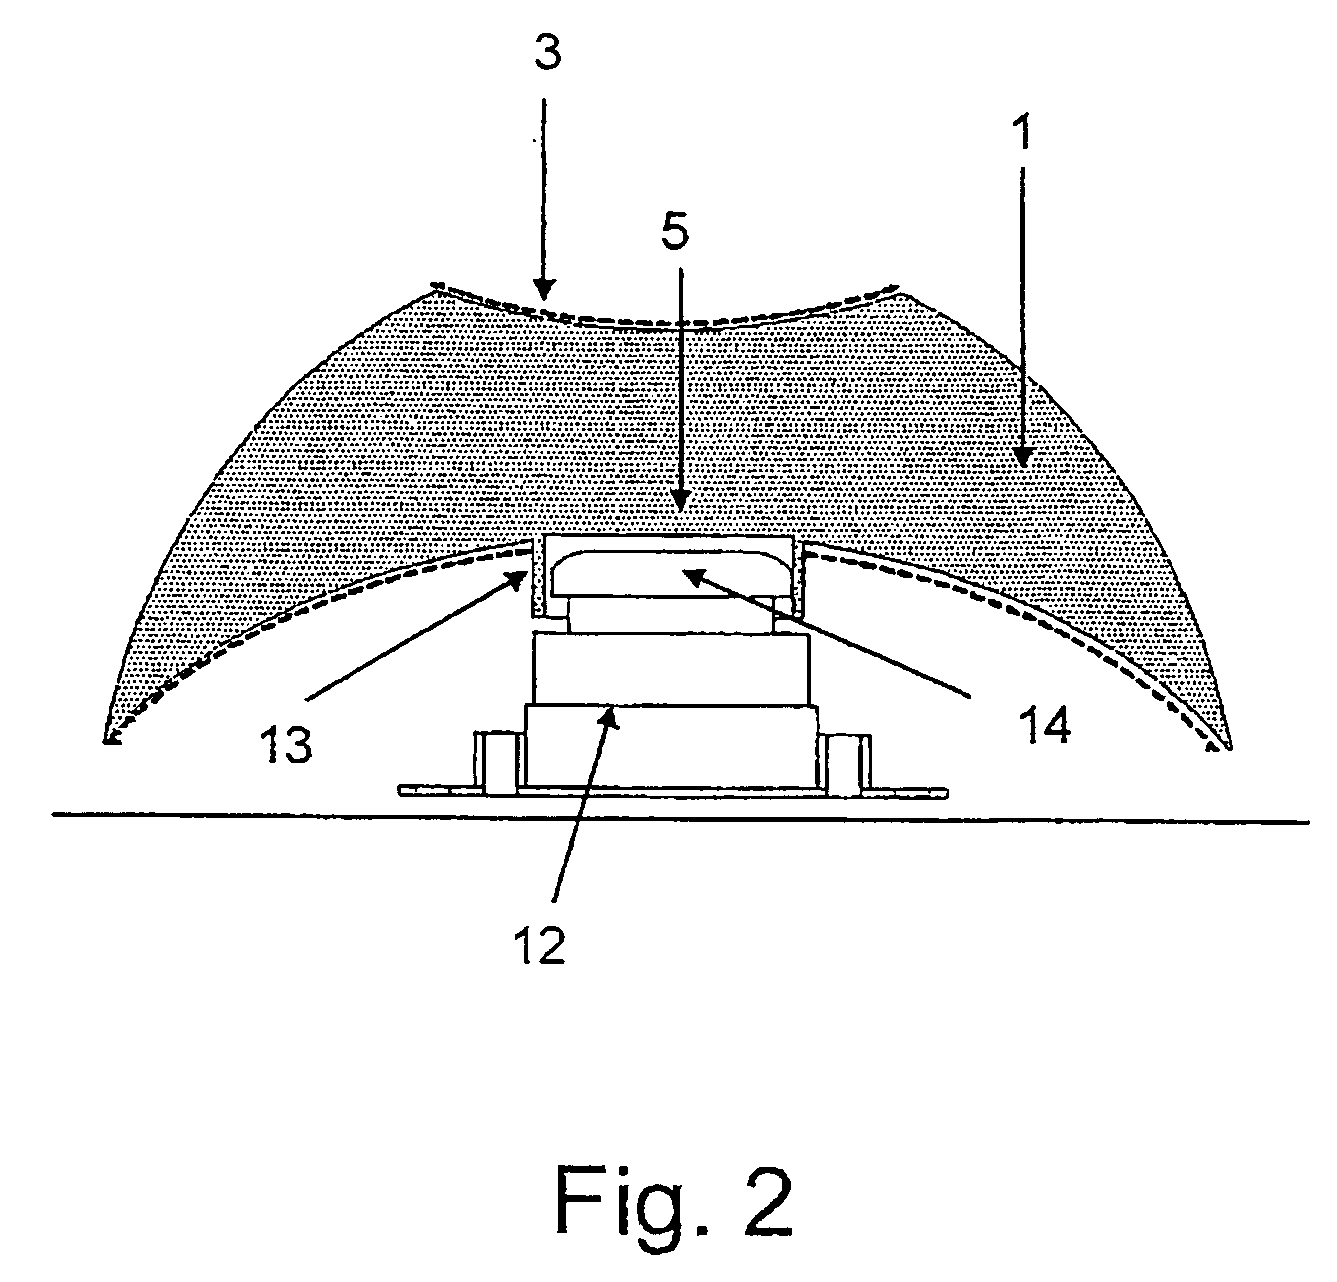 Omni-directional imaging and illumination assembly